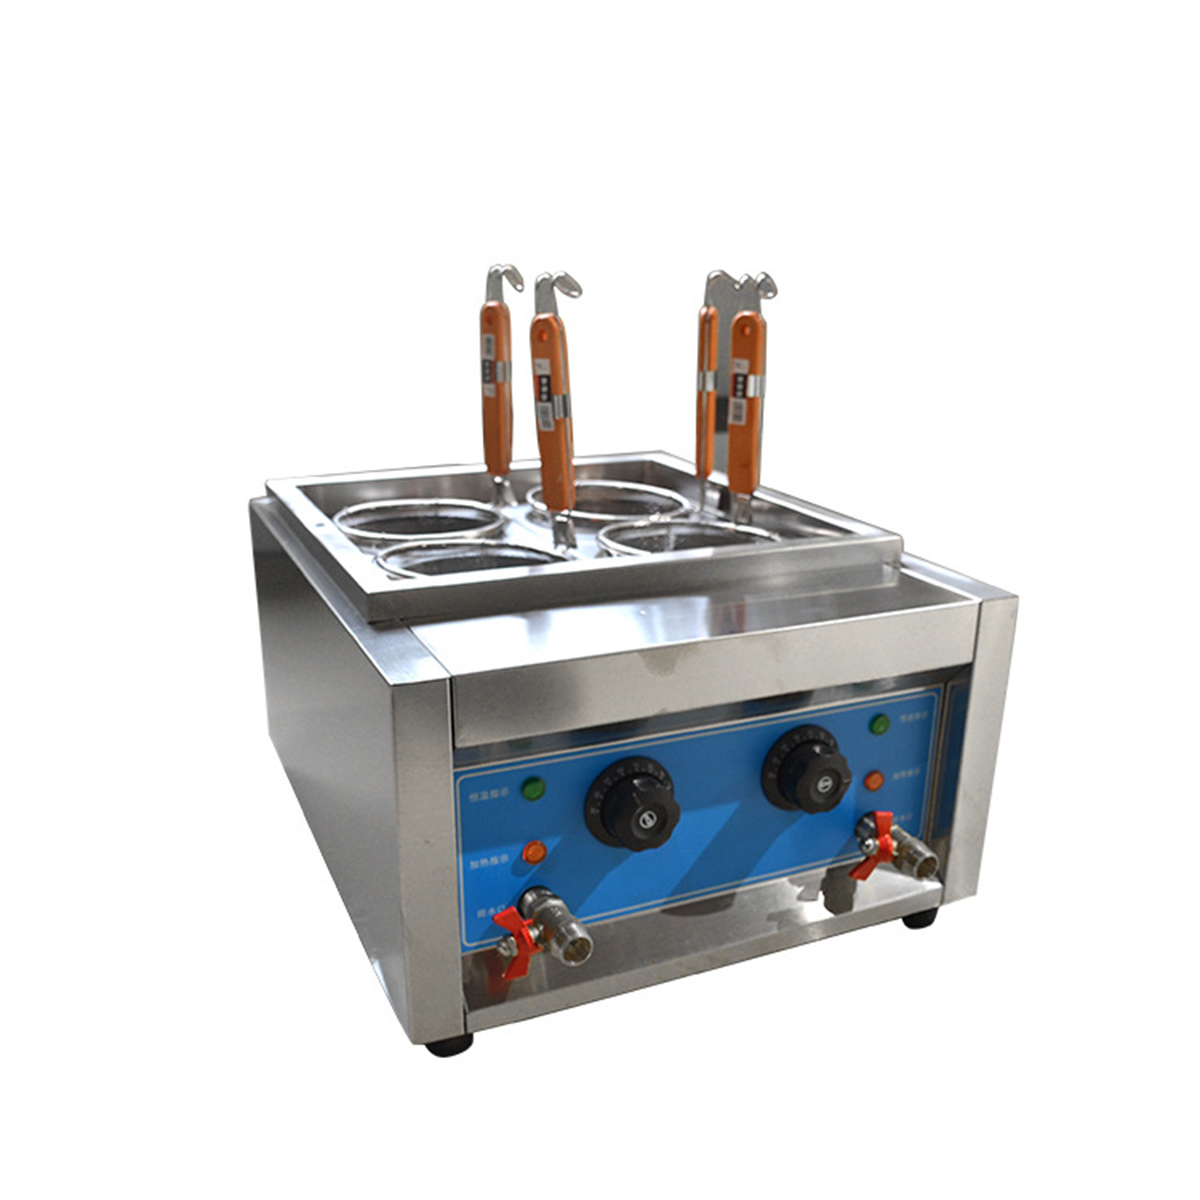 Commercial-4kw6kw-Table-Top-46-Baskets-Electric-Noodles-CookerPasta-Cooking-Machine-1402025